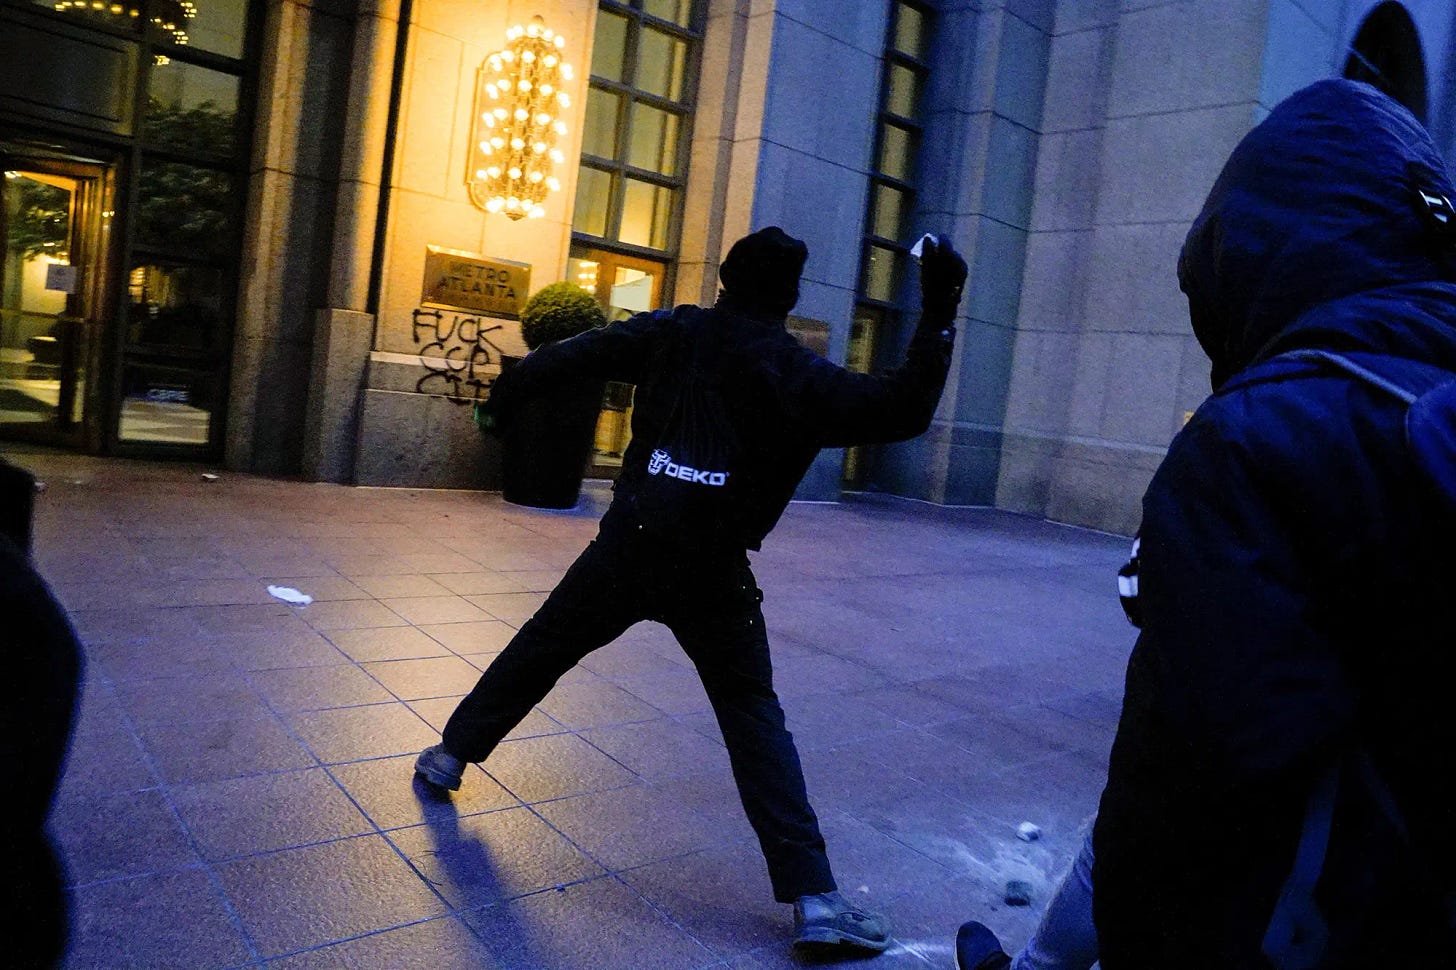 A protester throws a rock at a window during Saturday's demonstrations in Atlanta.